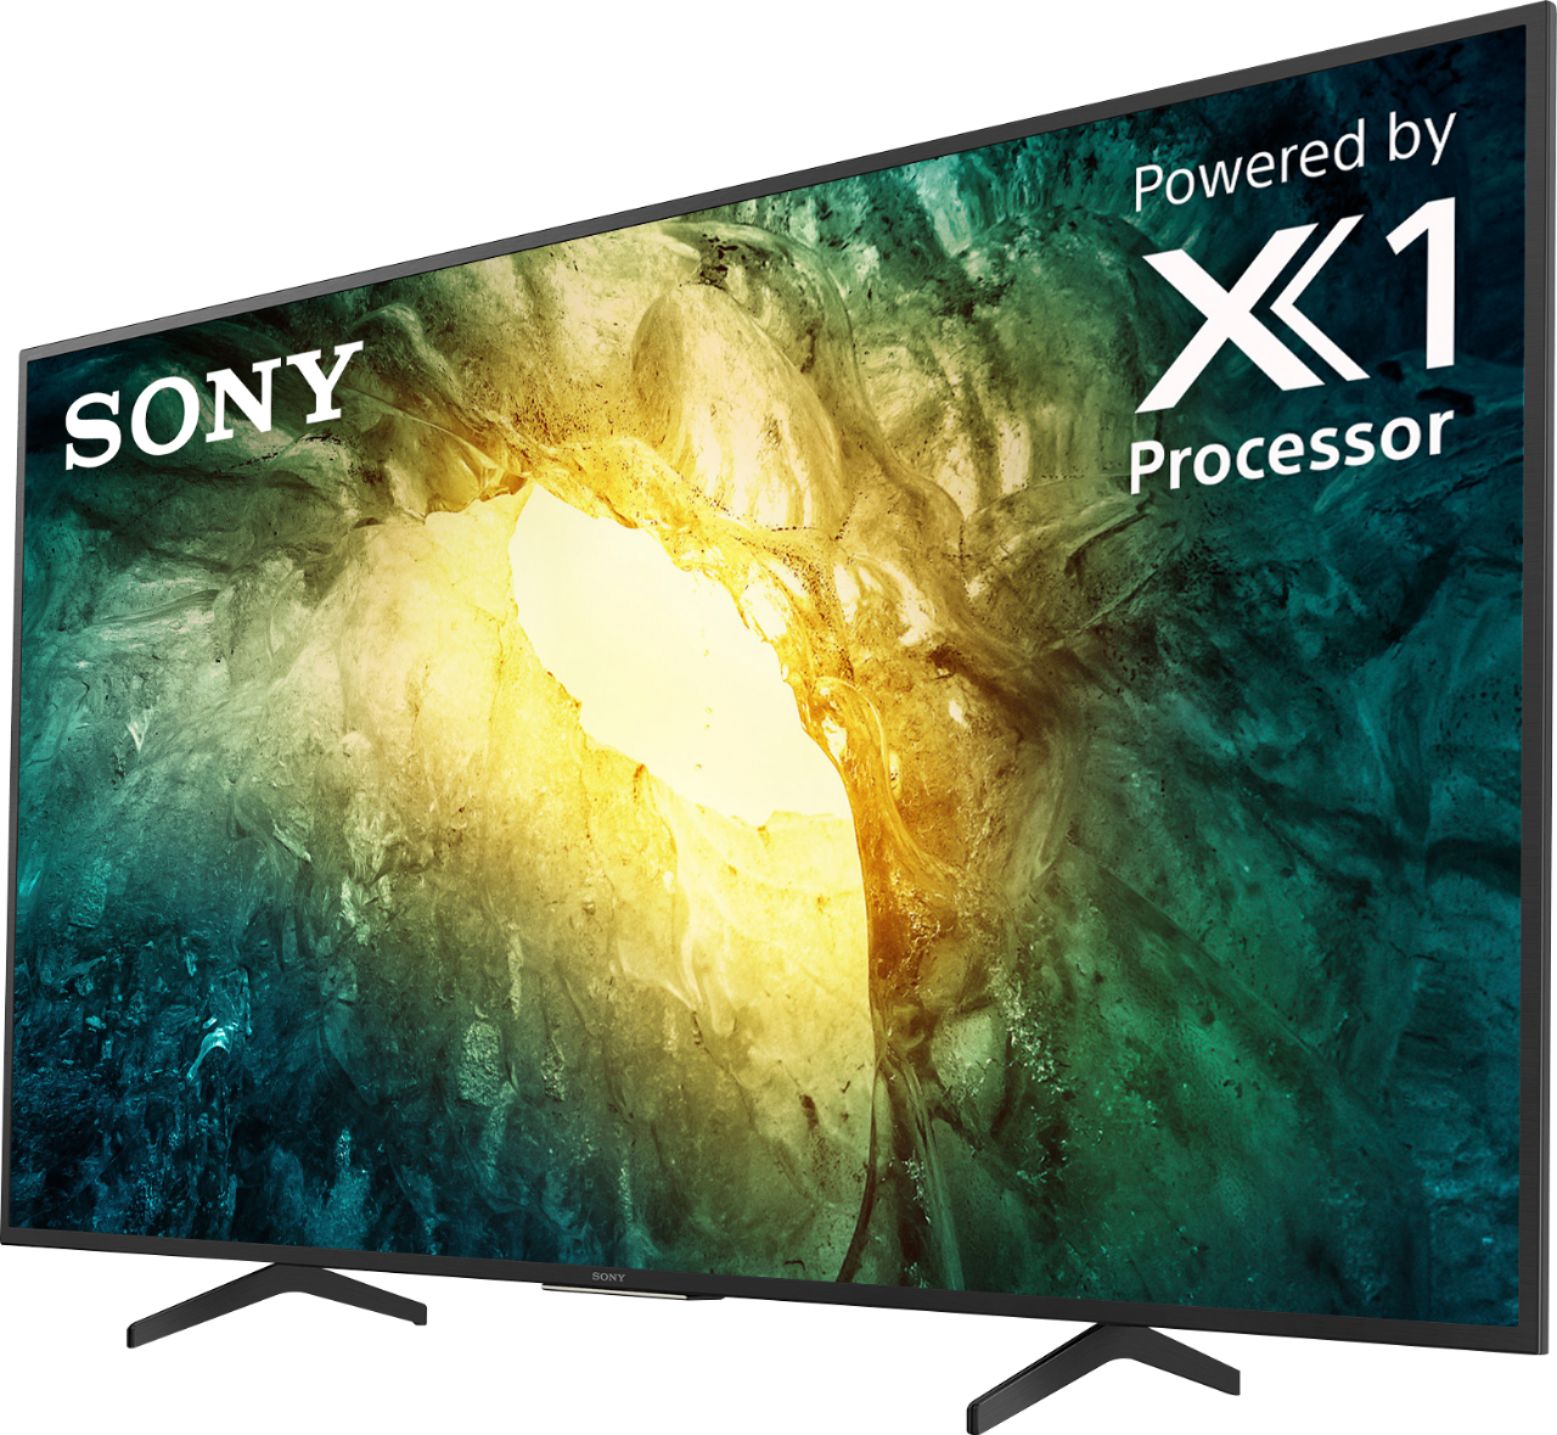 Left View: Sony - 55" Class X750H Series LED 4K UHD Smart Android TV